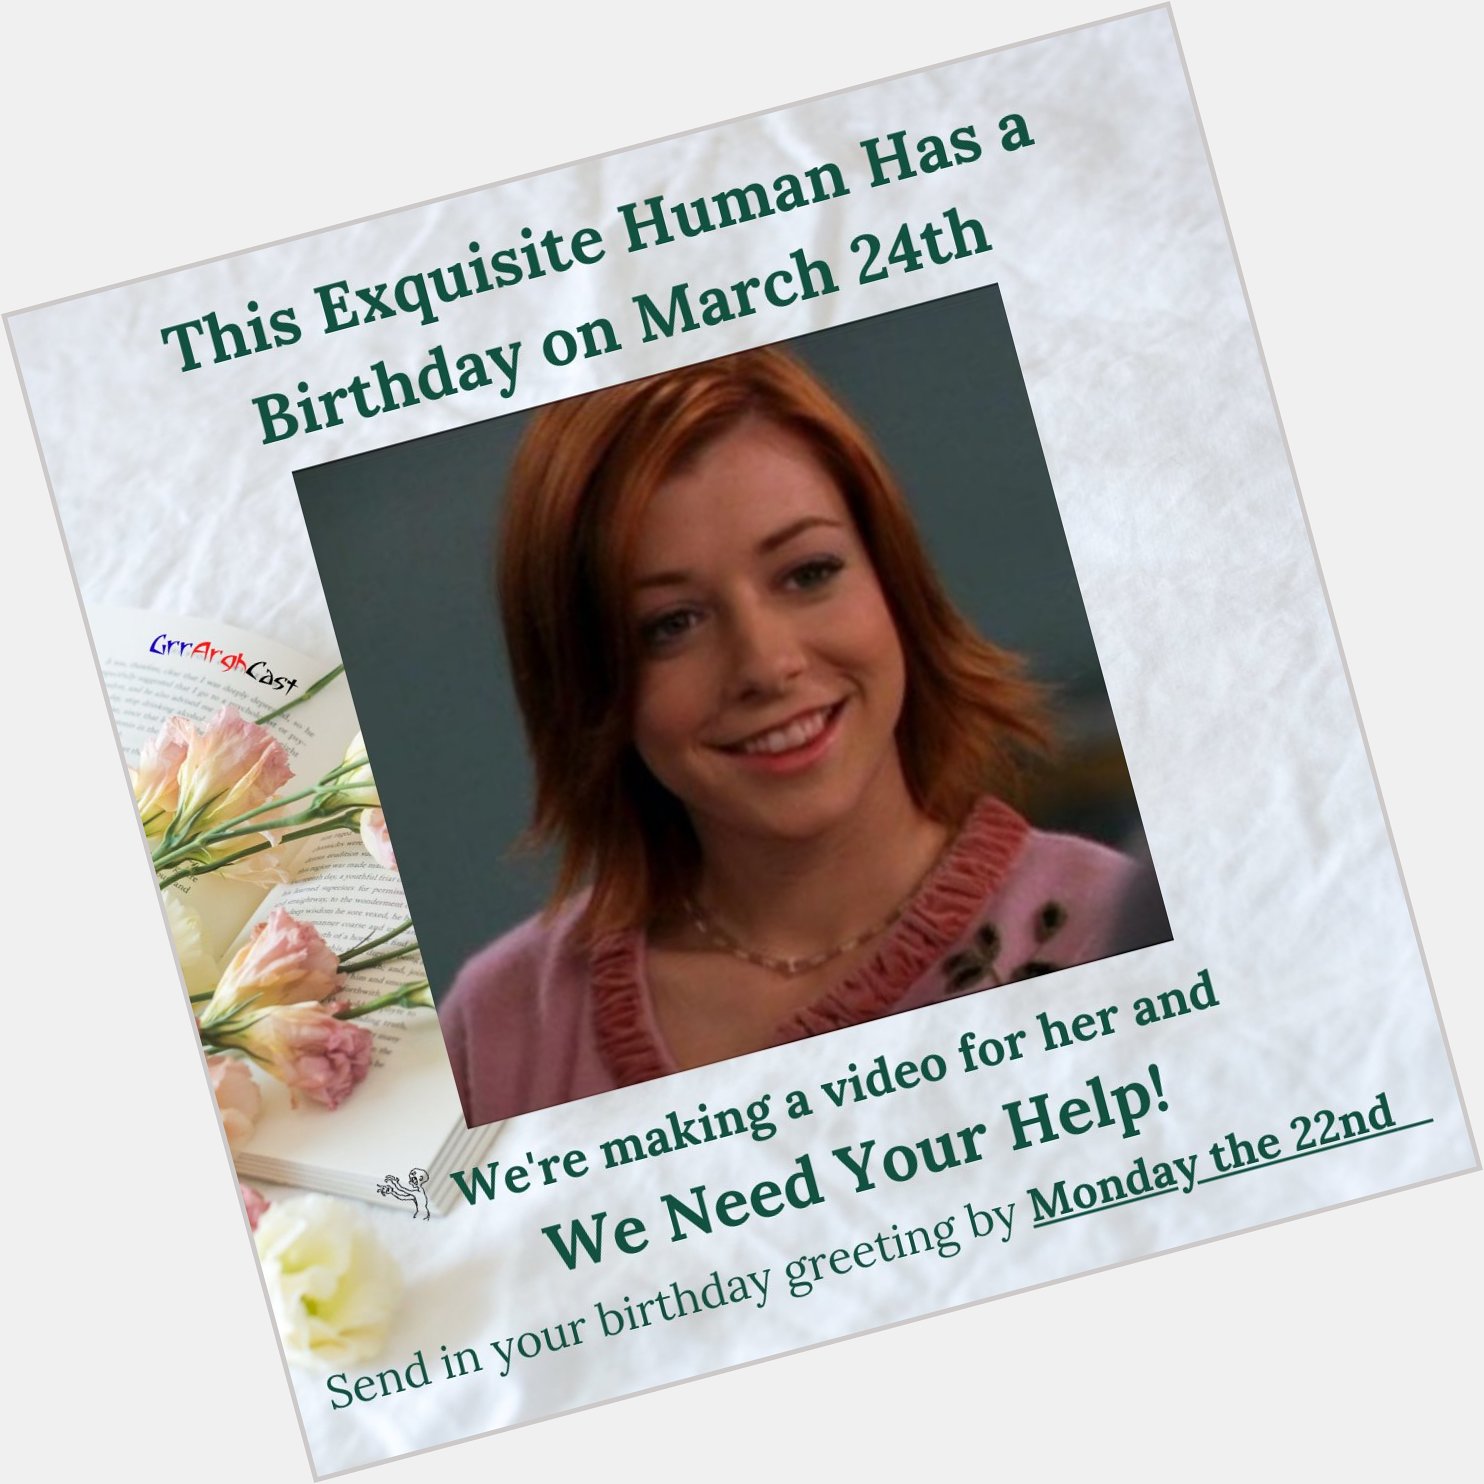 Send us a short video (10-15 seconds) wishing Alyson Hannigan a happy birthday. 
Email to brandon 